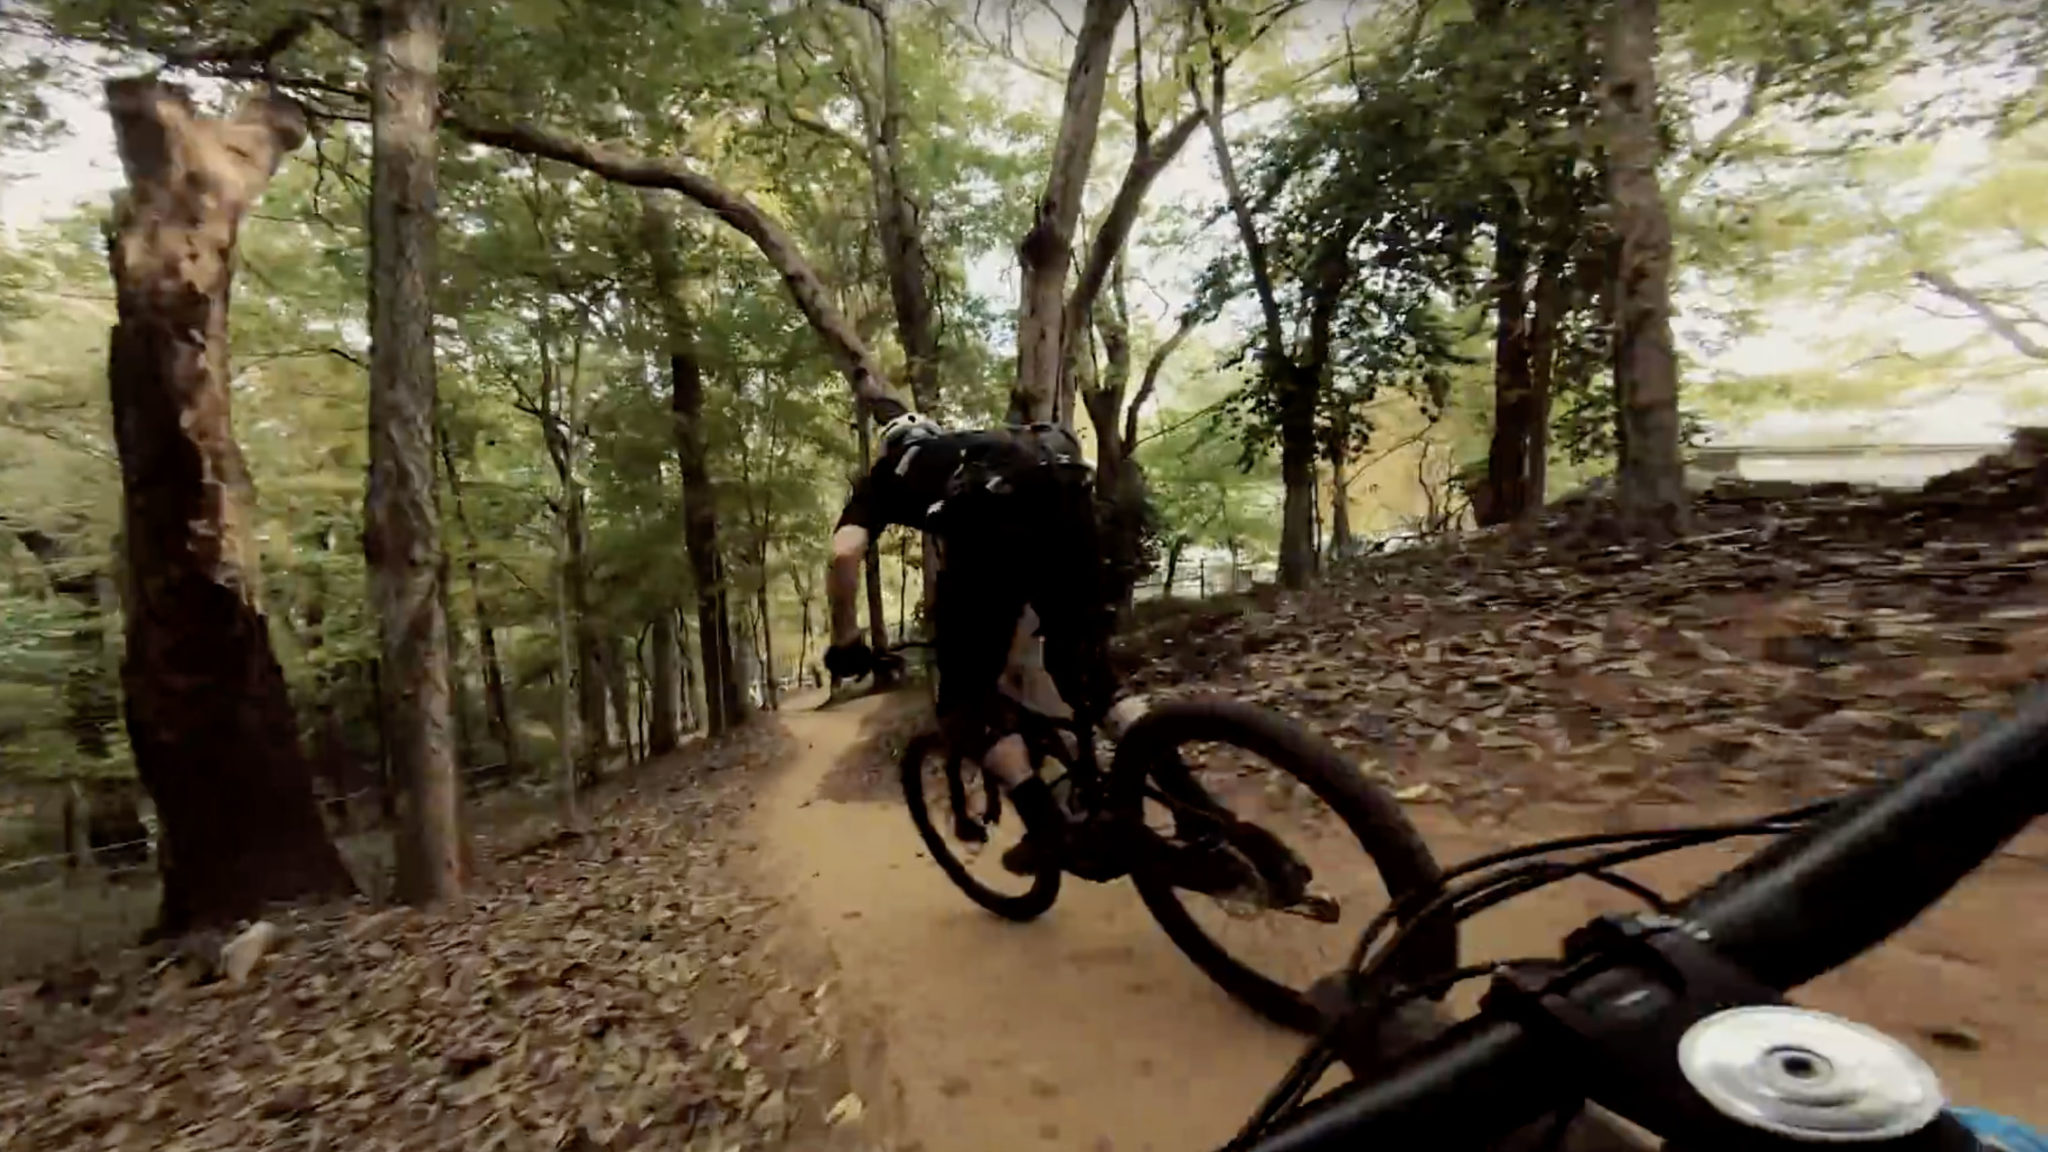 Jeff Kendall-Weed : shredding with the Arkansas riding community